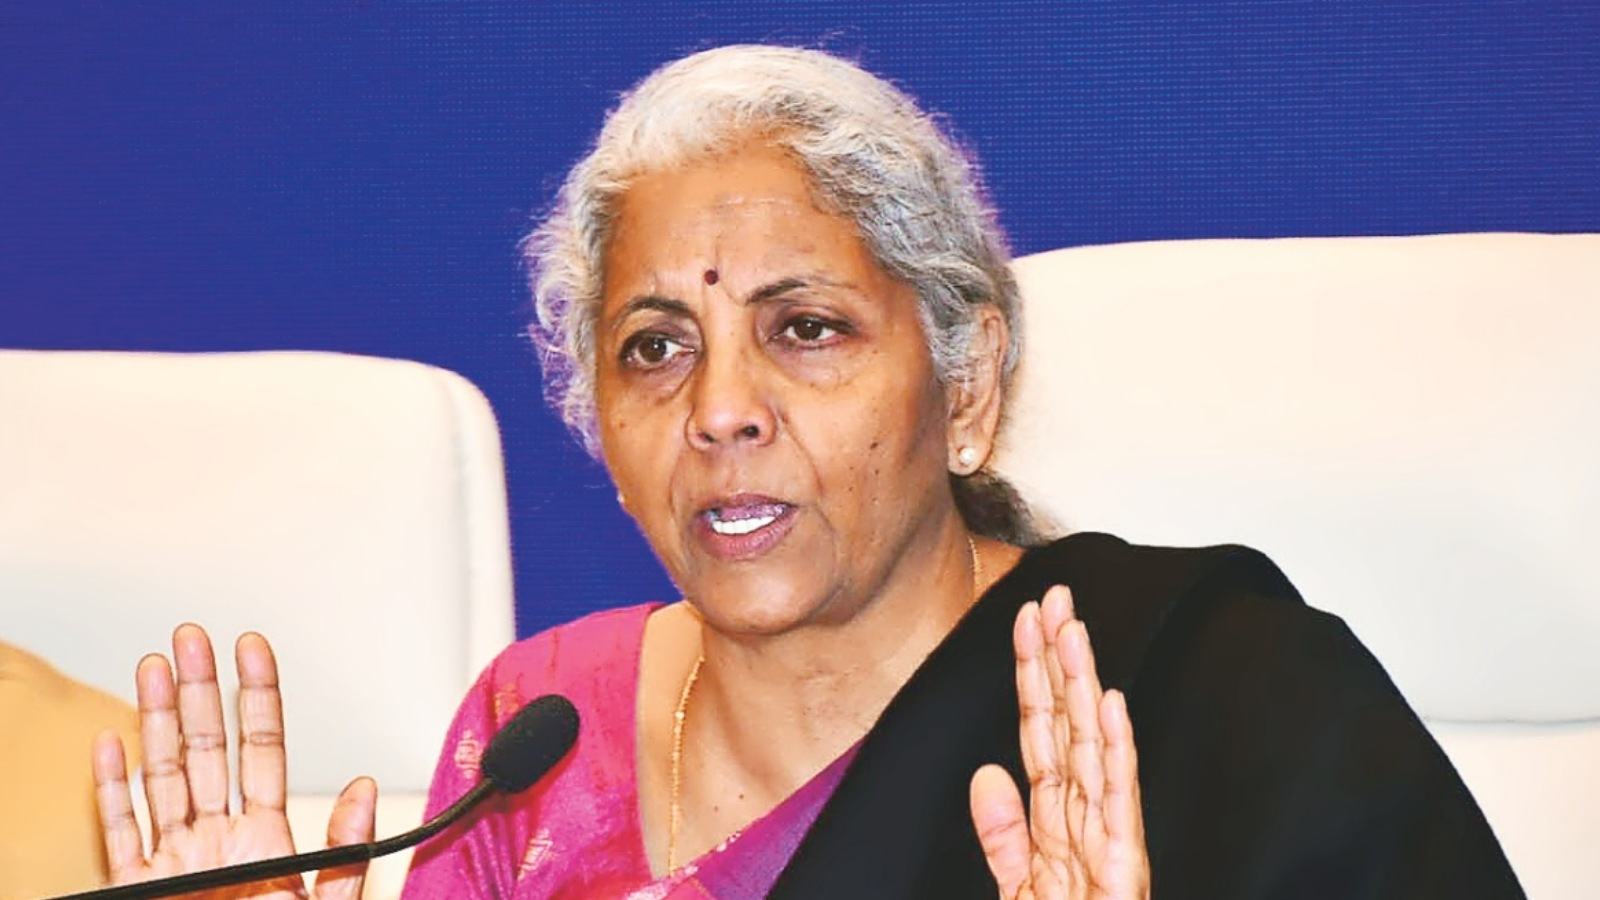 Our governance model is worth studying: FM Nirmala Sitharaman to management students